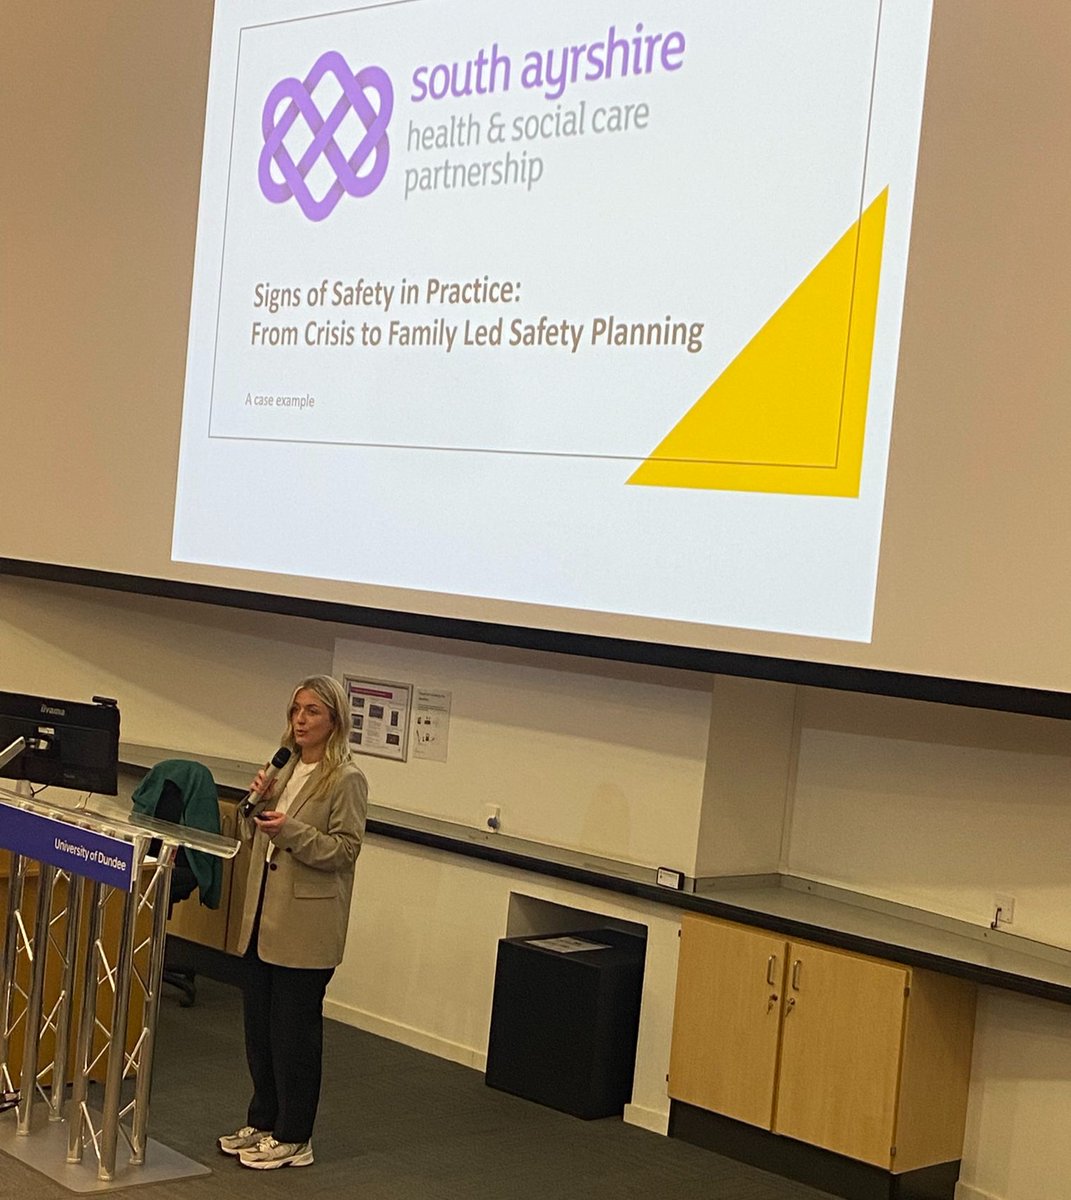 Delighted to be part of the Pride in Practice Conference today, this event provides an opportunity to celebrate front-line social work practice. Robyn Gordon from our Children’s Service is presenting Signs of Safety in Practice: From Crisis to Family Led Safety Planning. 💜